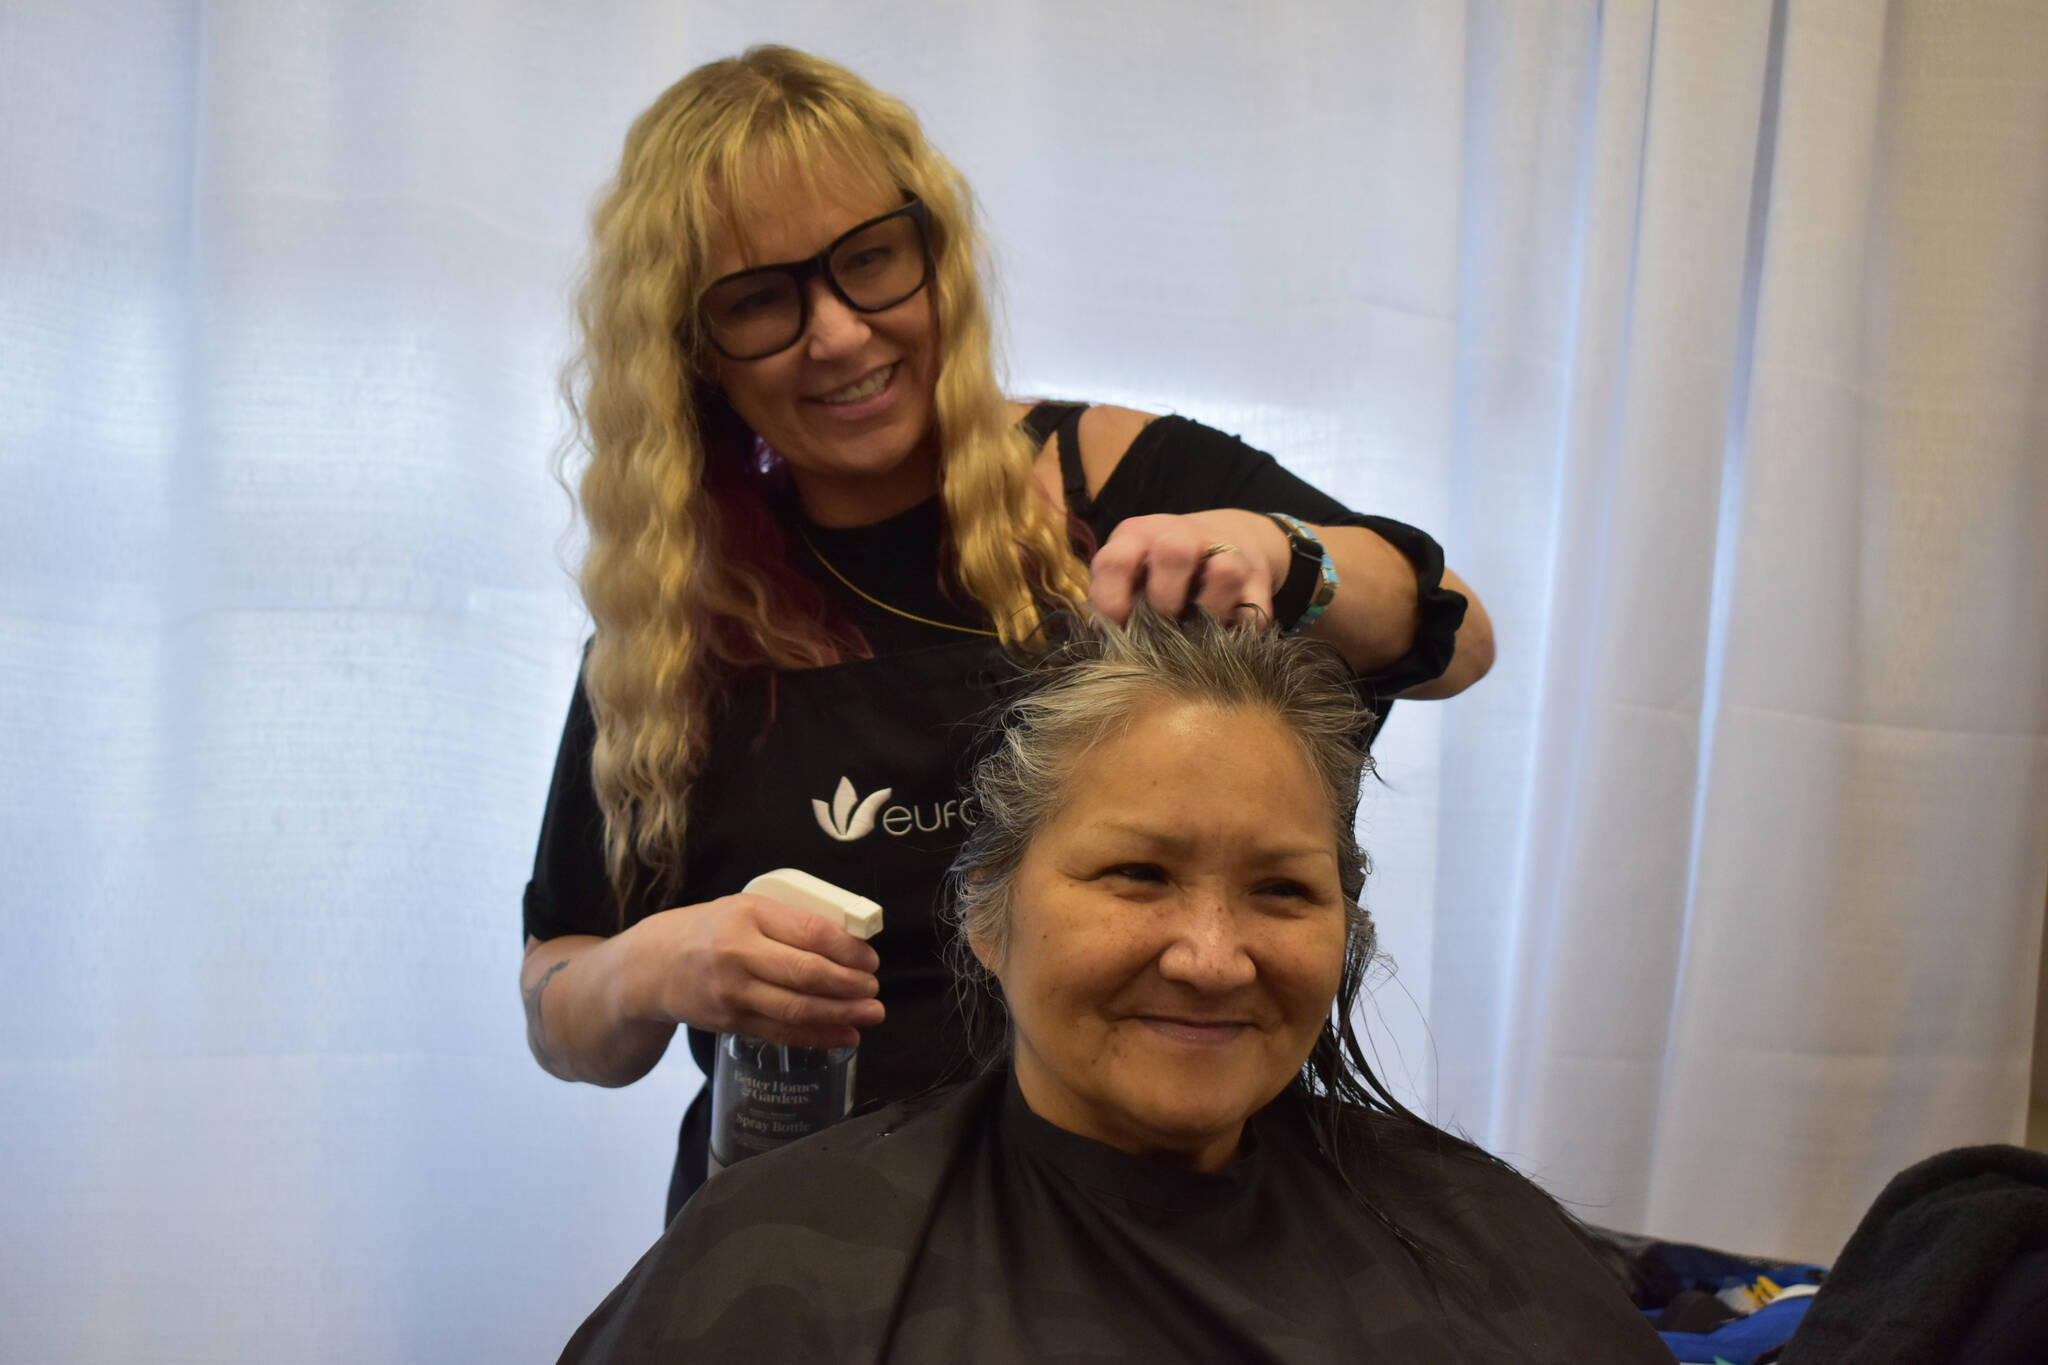 Tamera Mapes gives a free haircut to a client during Project Homeless Connect on Tuesday, Jan. 31, 2023, at the Soldotna Regional Sports Complex in Soldotna, Alaska. (Jake Dye/Peninsula Clarion)